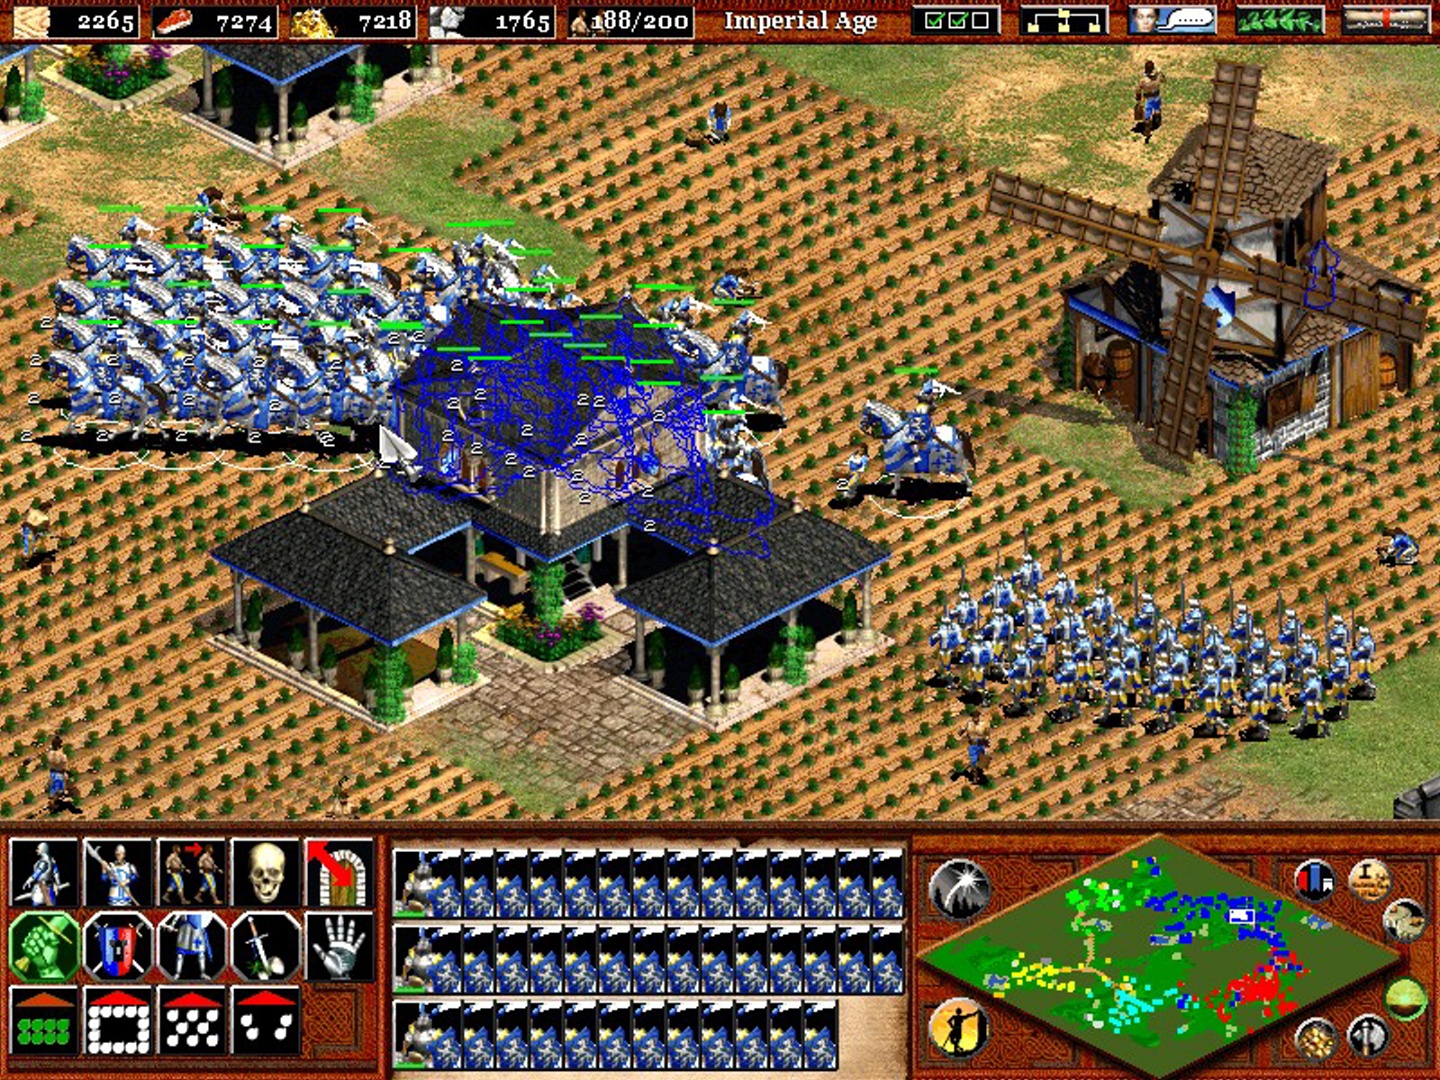 age of empires 2 resolution patch download